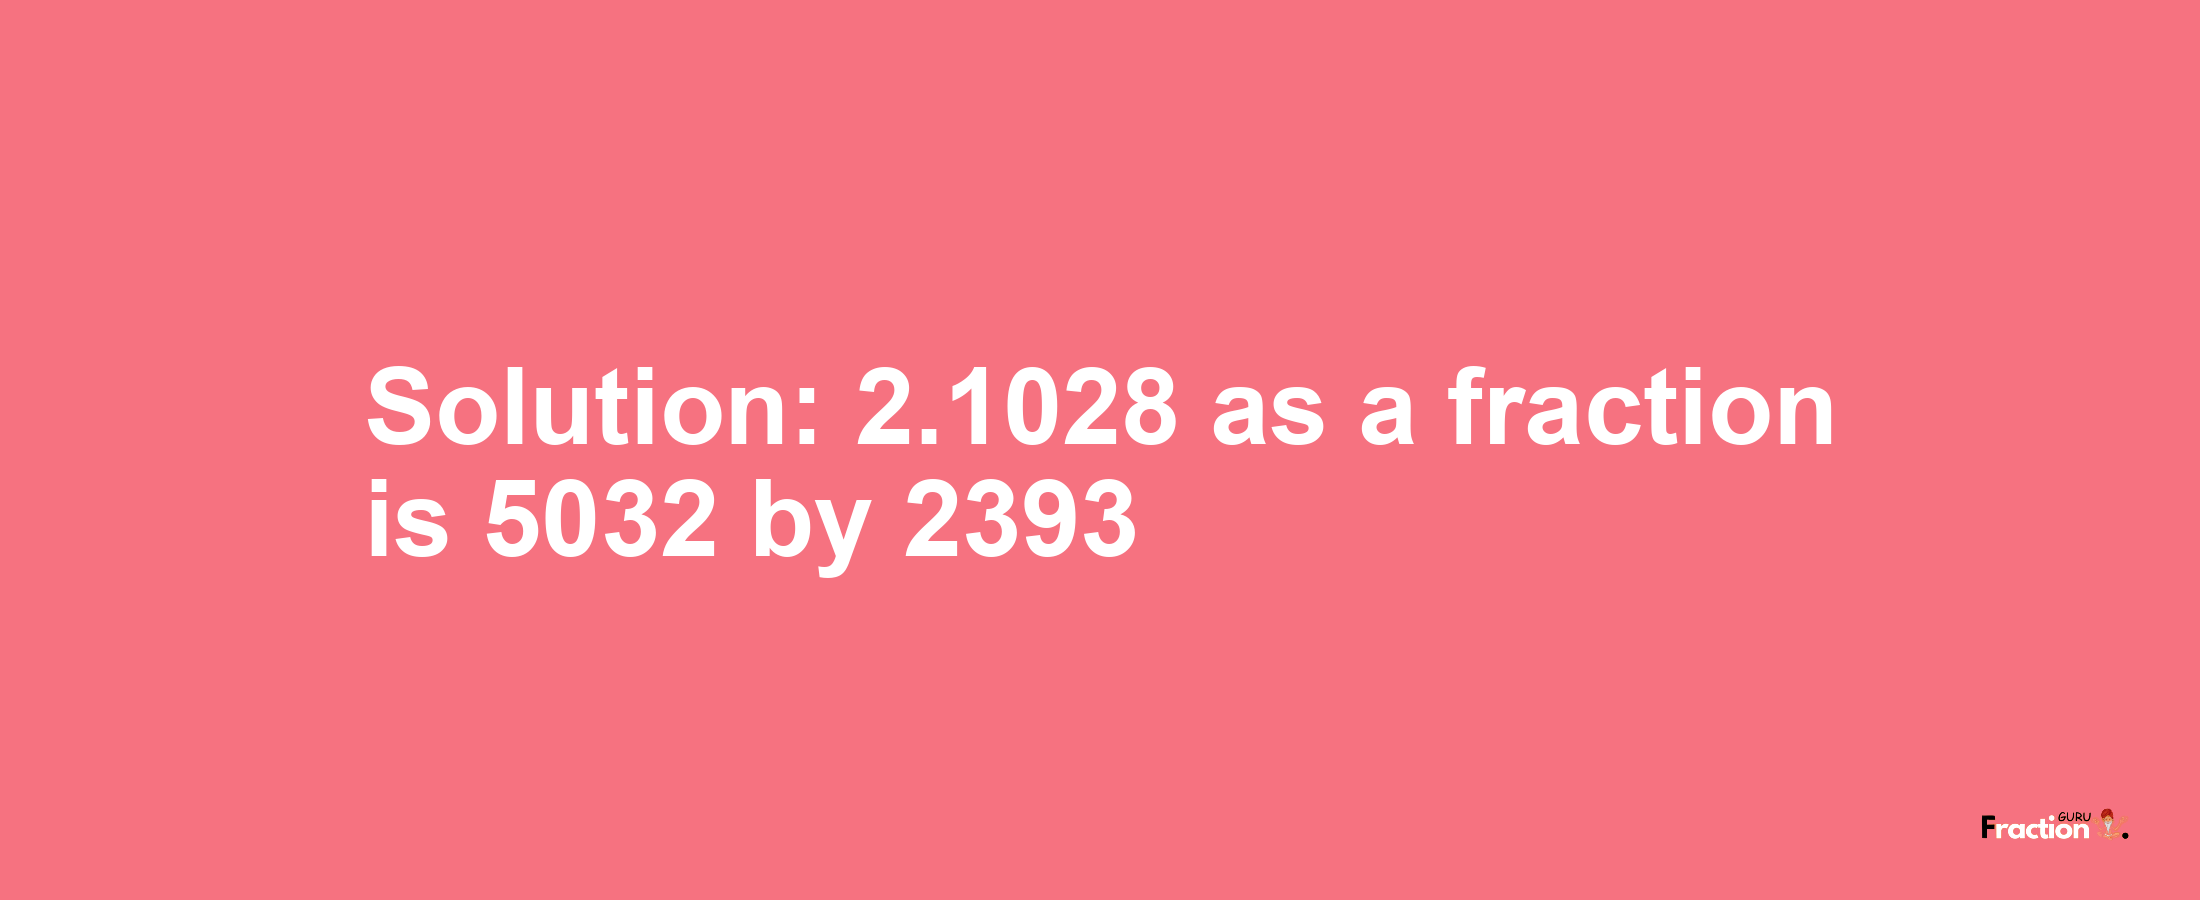 Solution:2.1028 as a fraction is 5032/2393